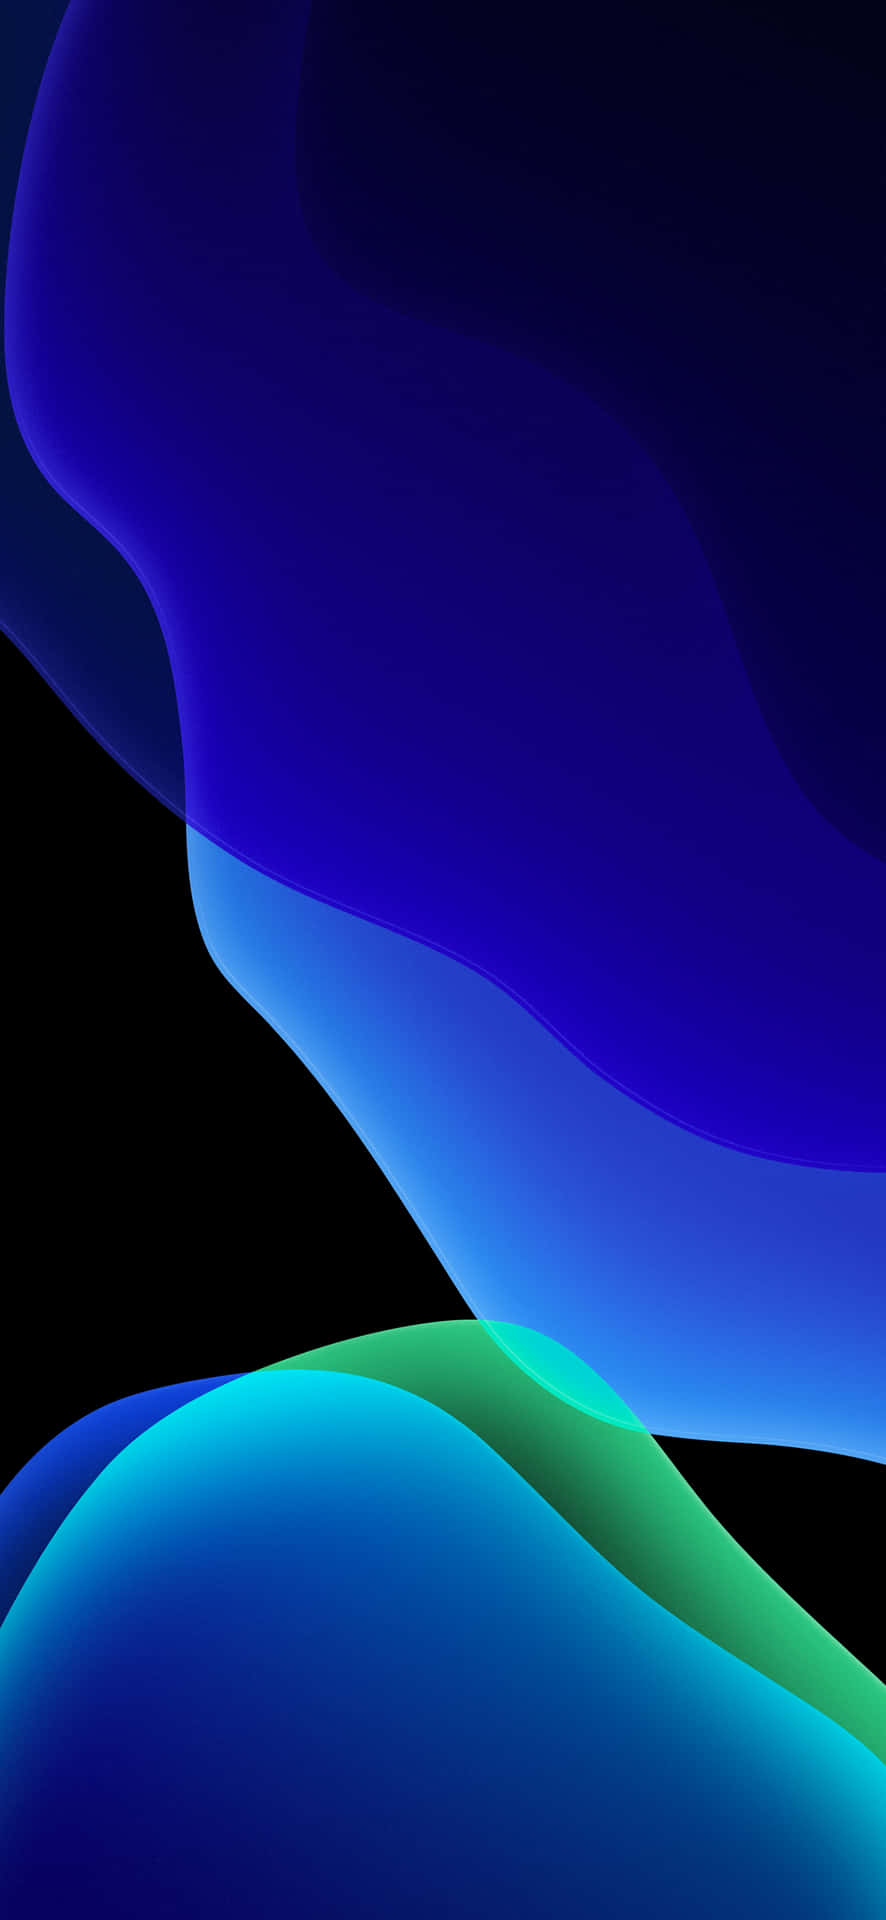 "The Iphone Xr - Ready to Change Your Life" Wallpaper